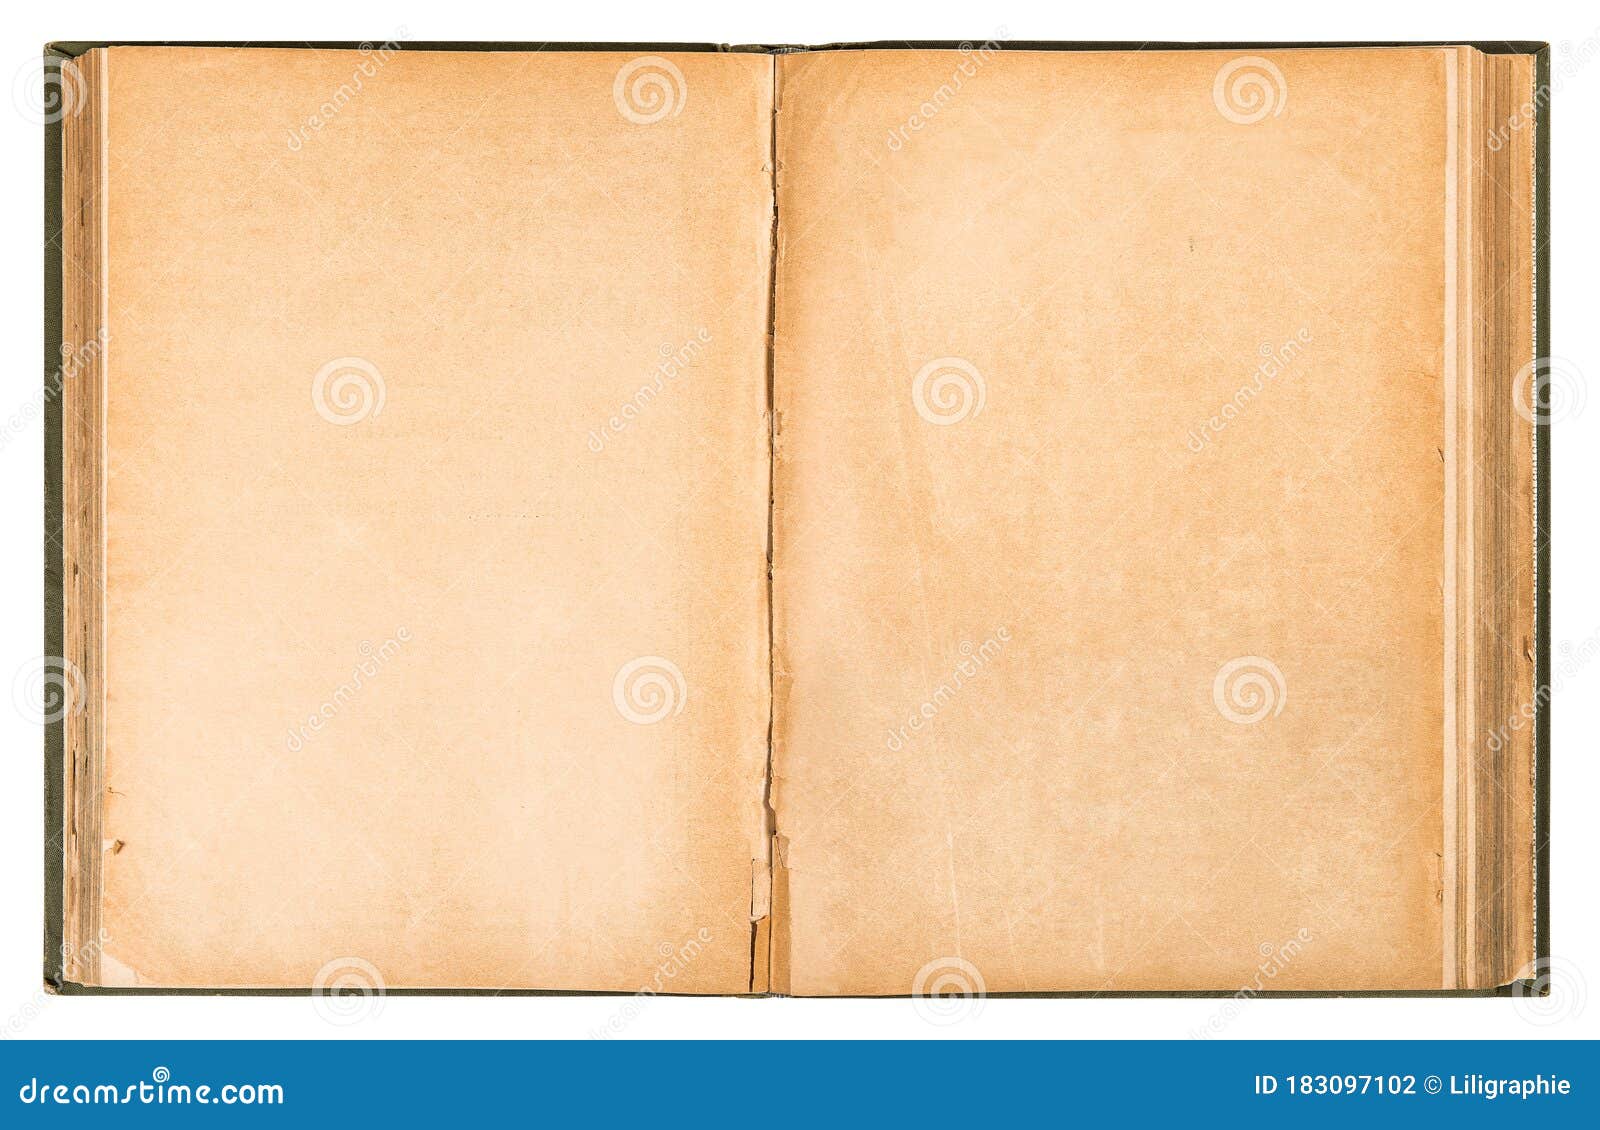 Image result for old book pages background  History background Powerpoint  background design Wallpaper powerpoint